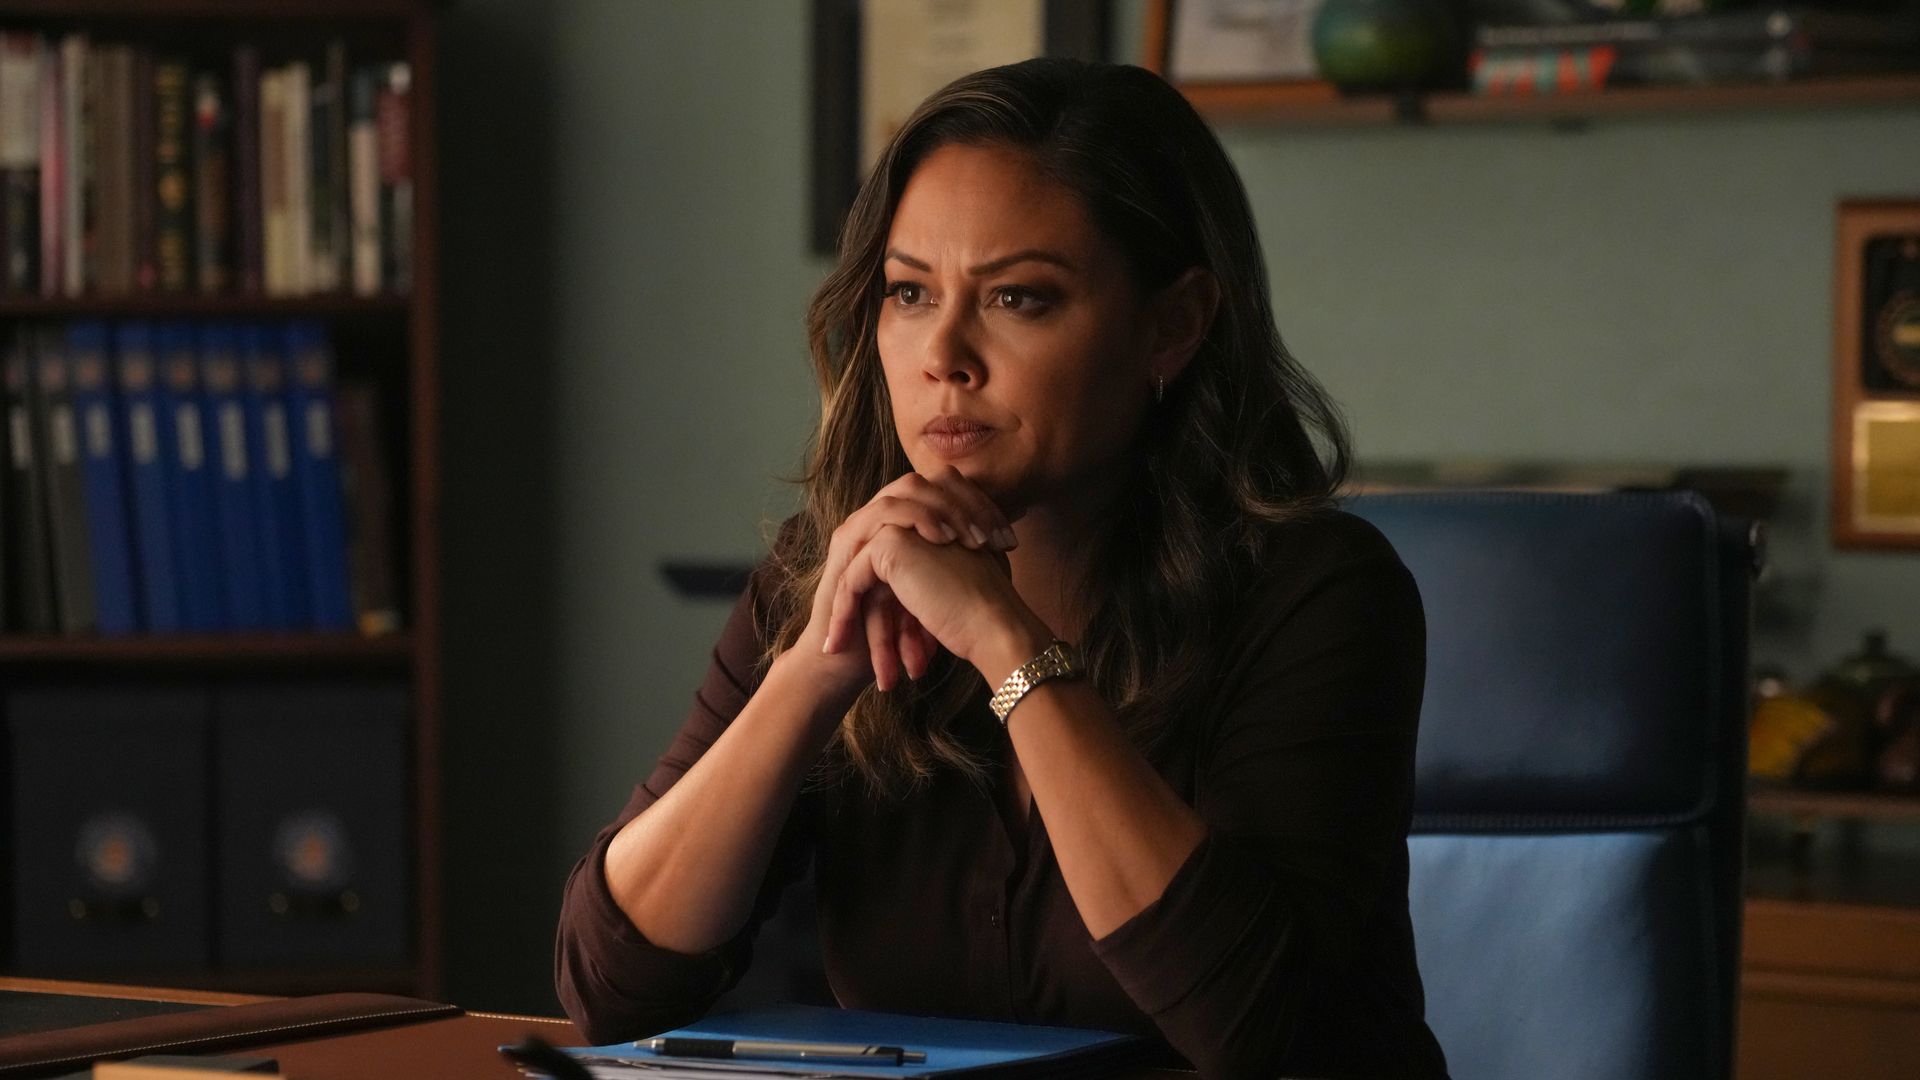 NCIS: Hawai'i star Vanessa Lachey shares emotional tribute to late colleague